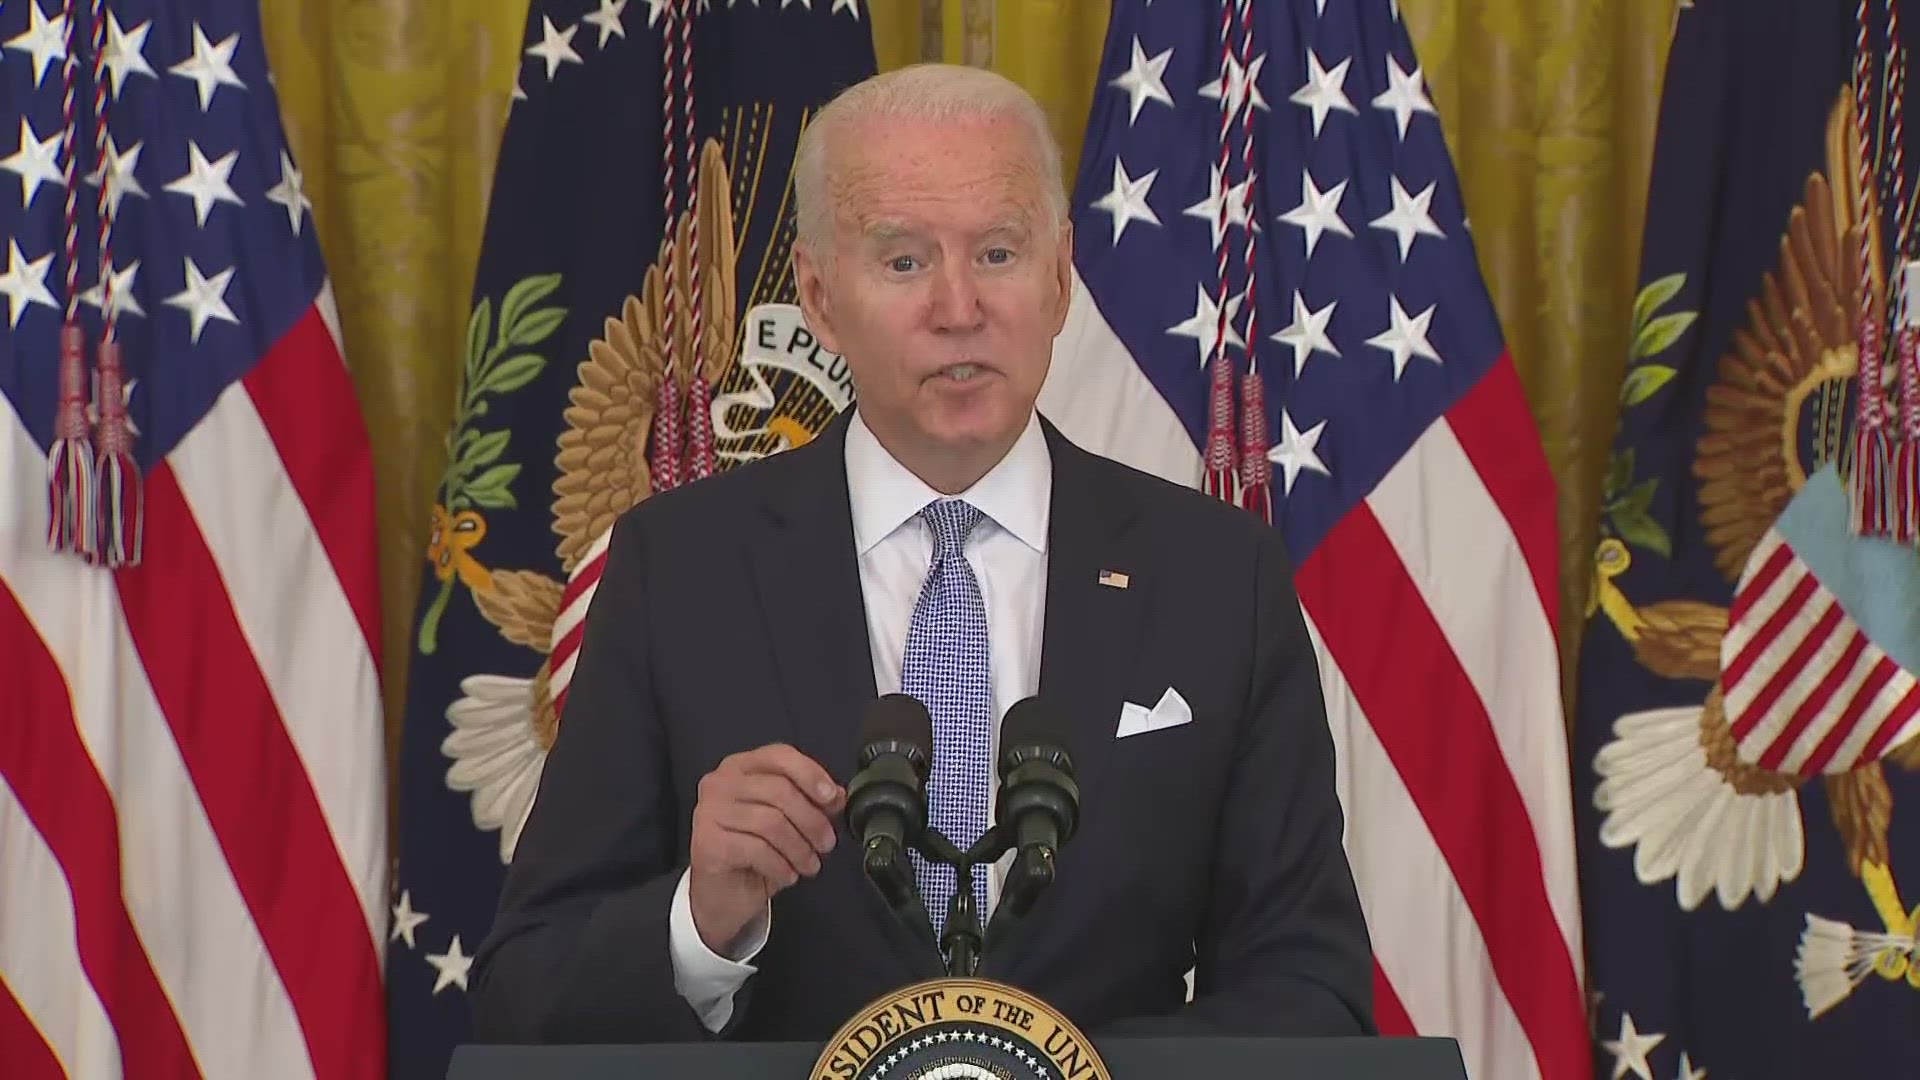 President Joe Biden addressed the nation Thursday, urging Americans to get vaccinated against the coronavirus.